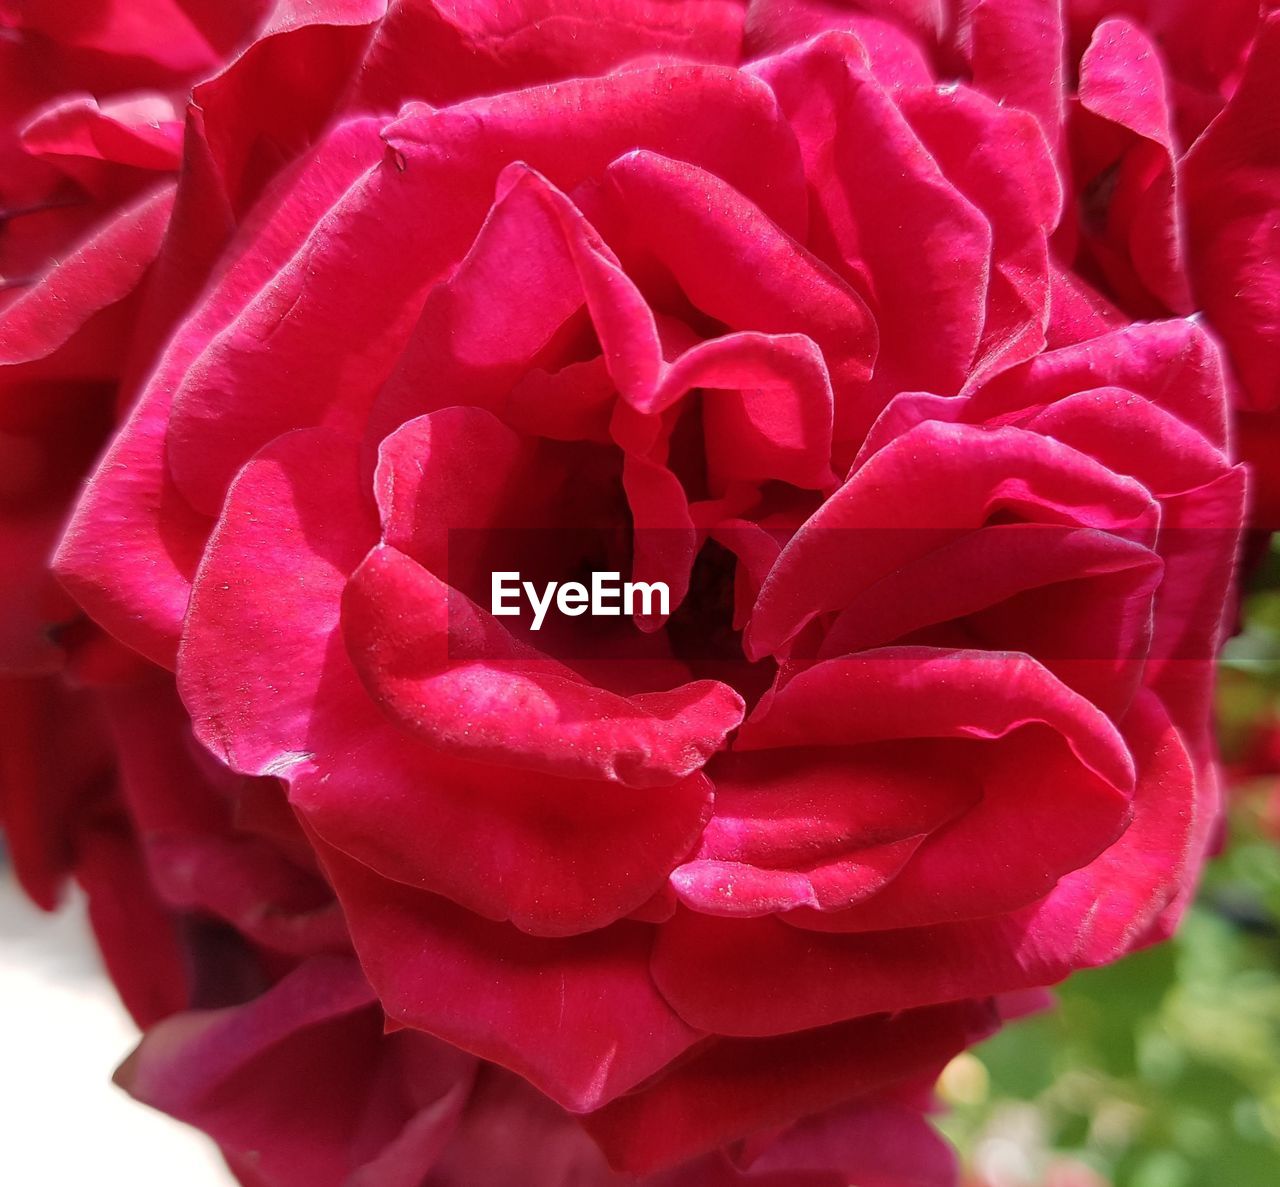 CLOSE-UP OF PINK ROSE IN RED FLOWER